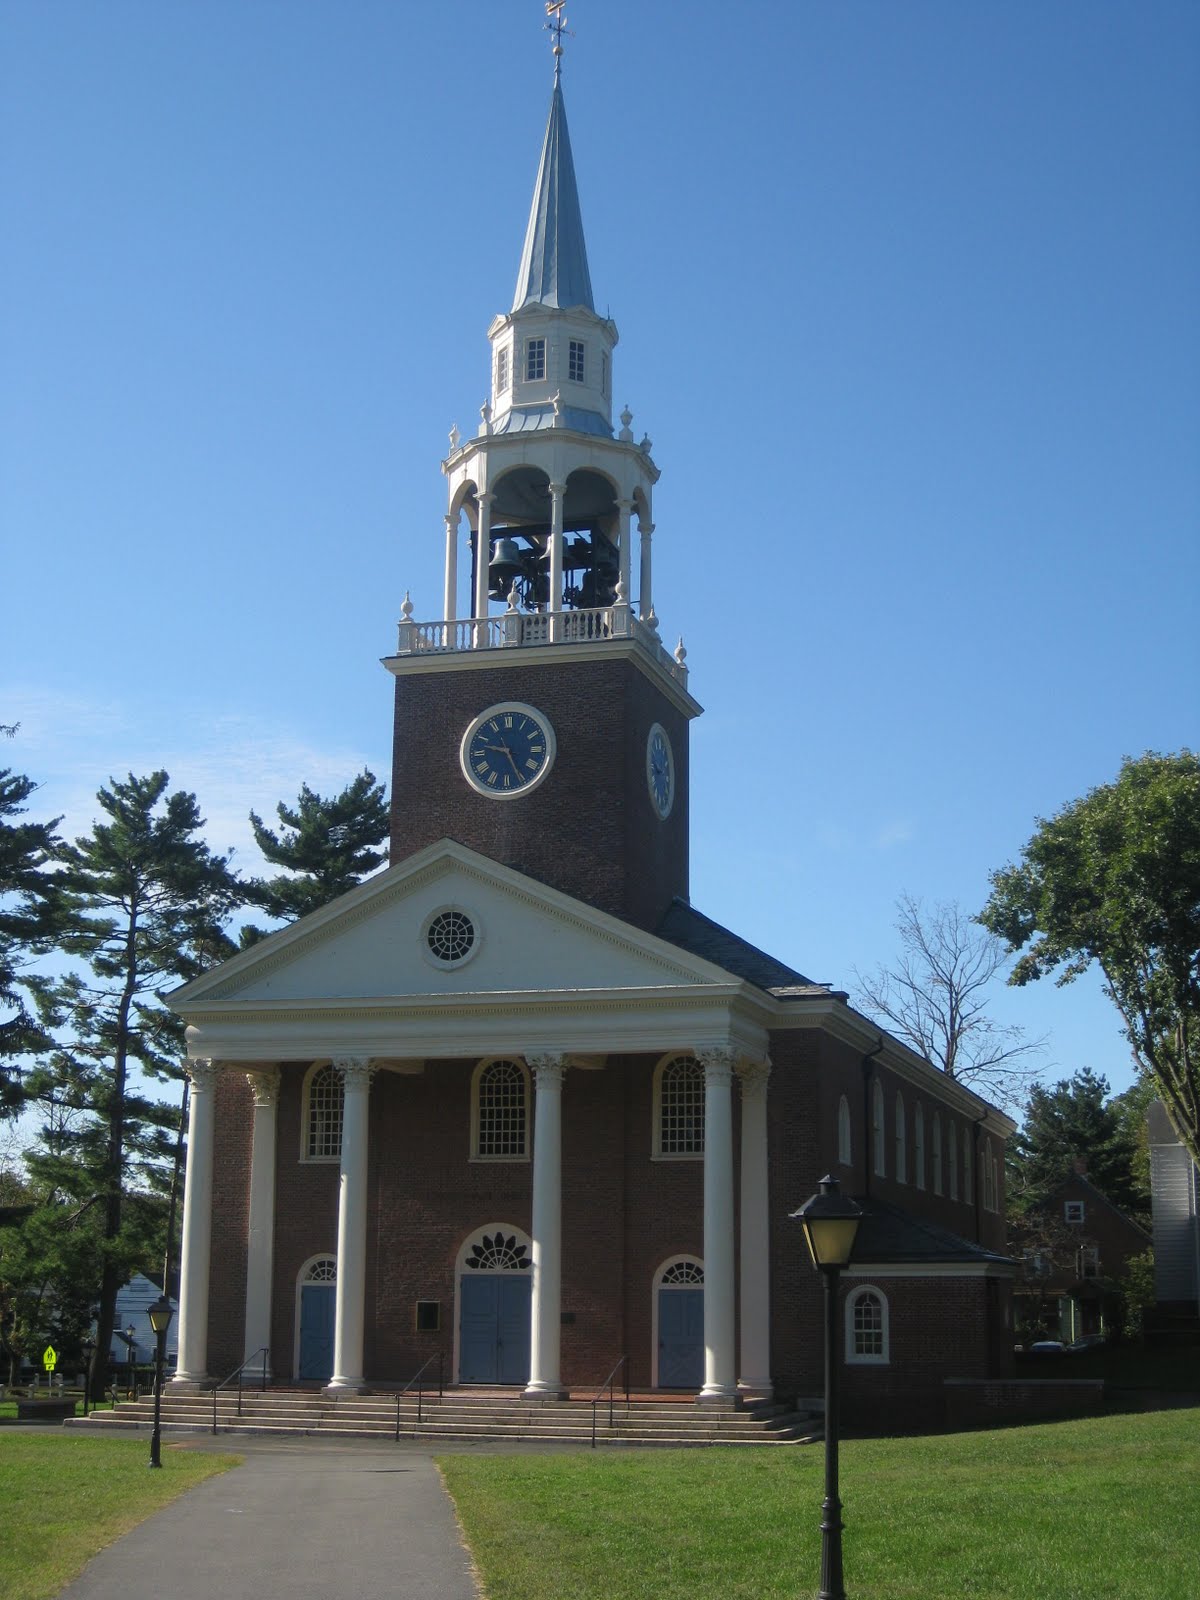 Seymour St. John Chapel on the campus of Choate Rosemary Hall in Wallingford, CT - Photo by Michelle Judd, CRH '98